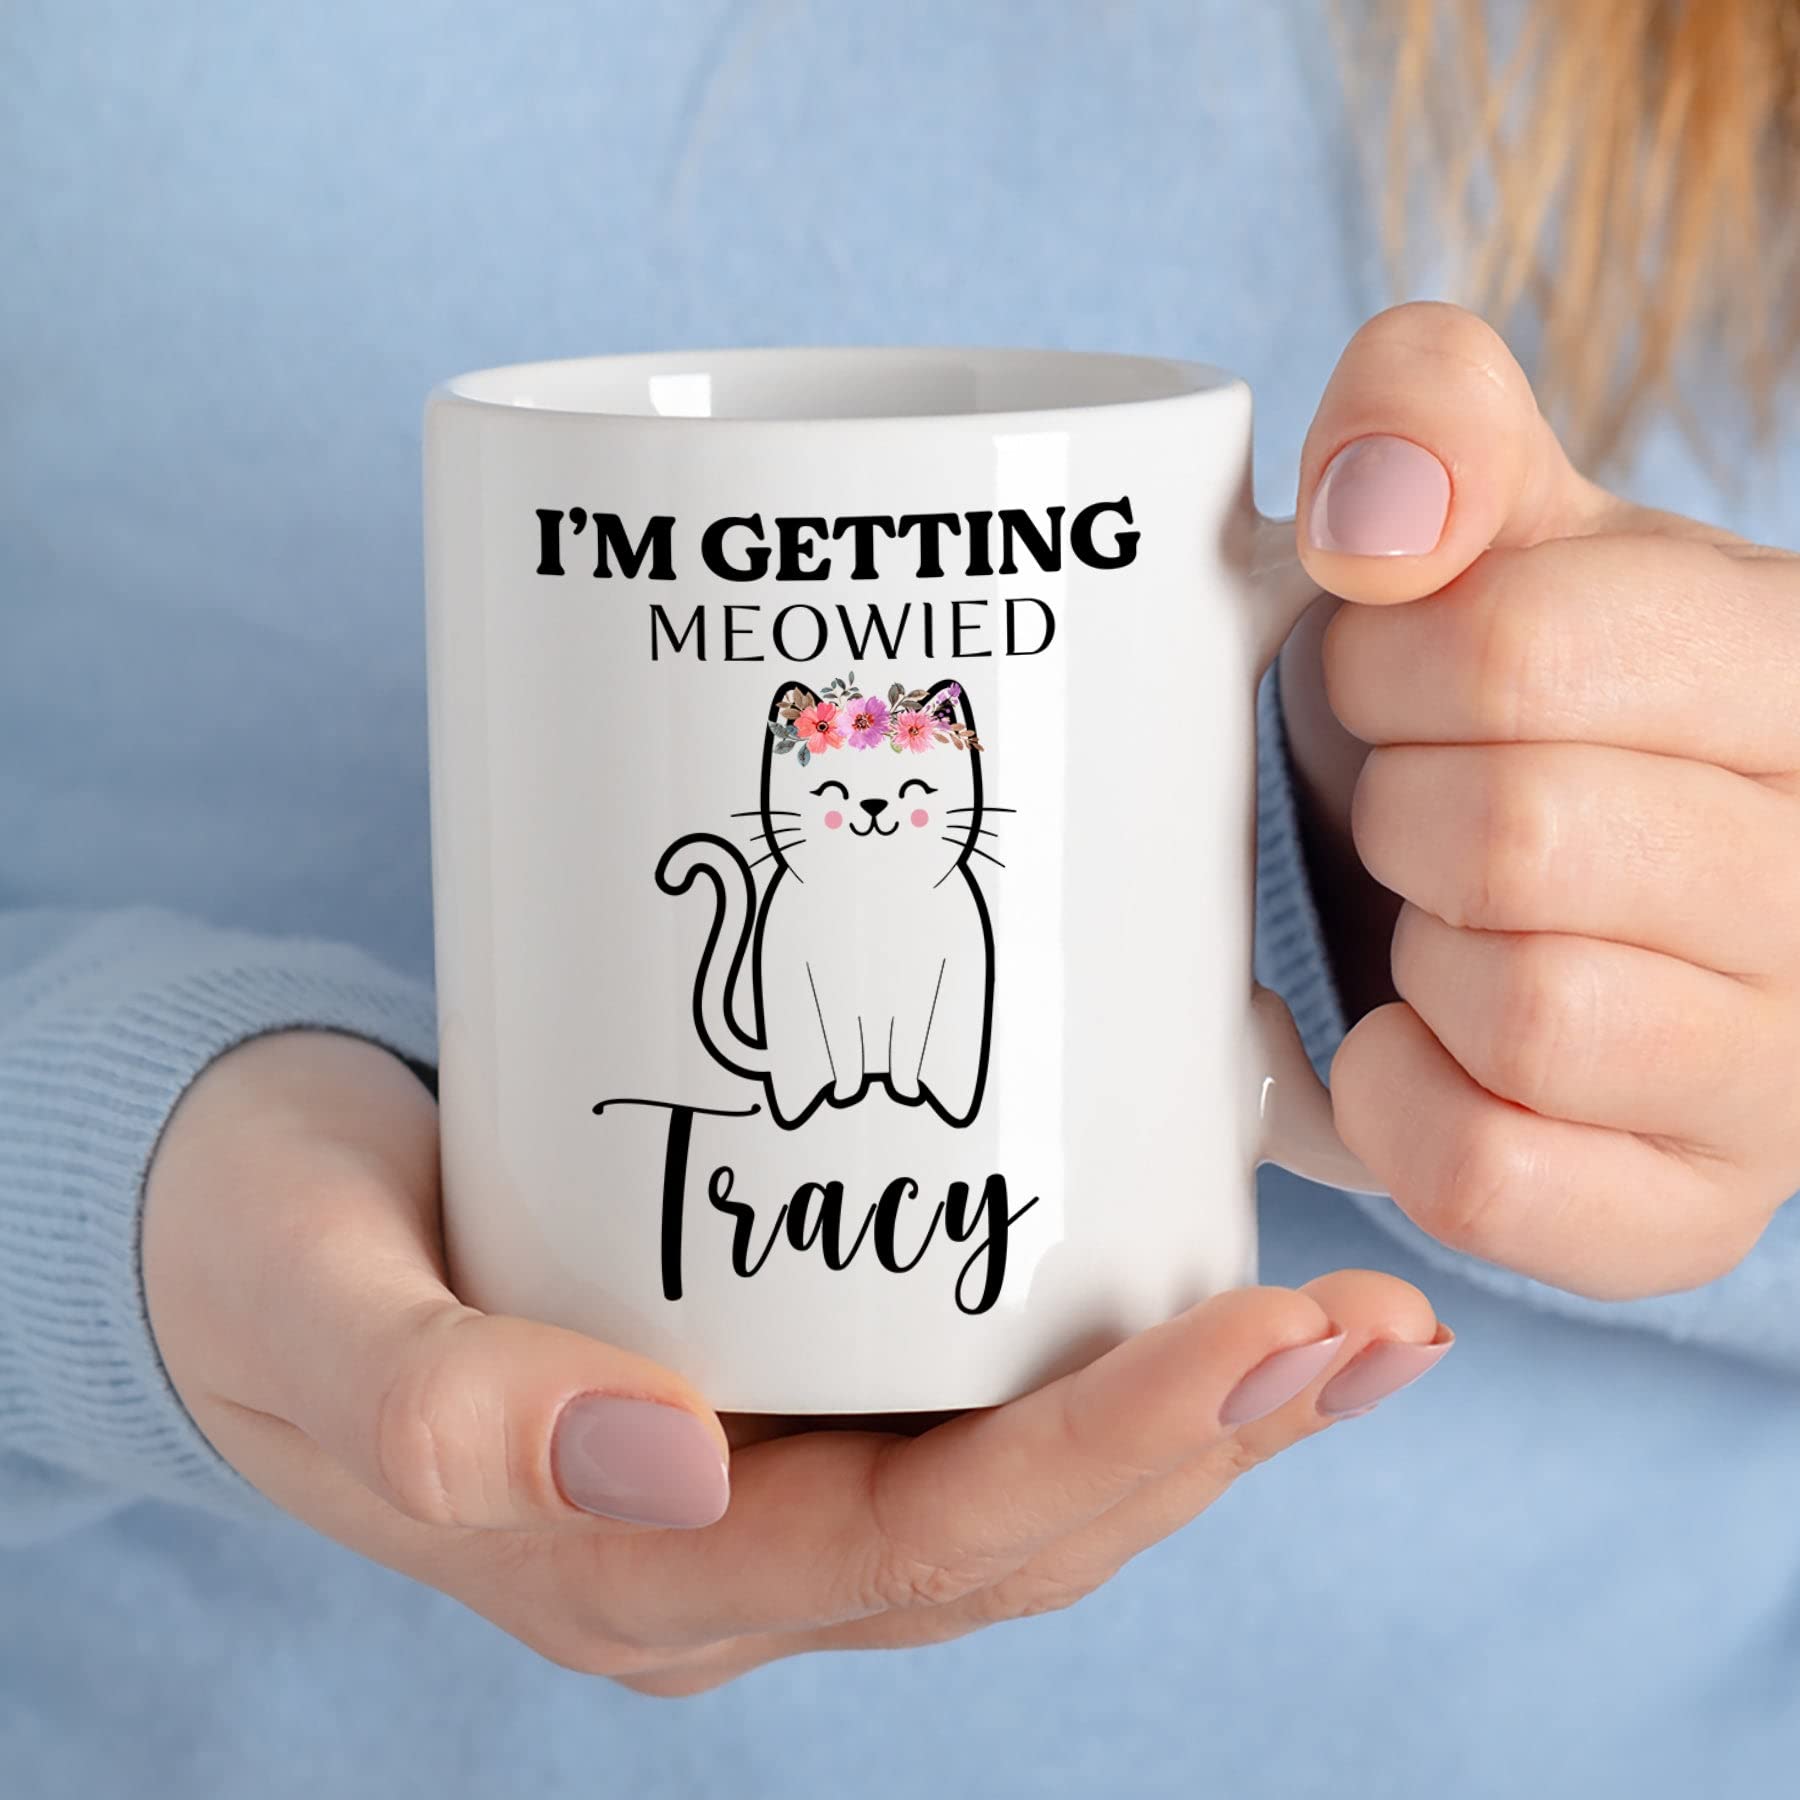 I'm Getting Meowied Couples Mug Set of 2 Personalized Gift With Name Gifts For Engagement, Wedding, I'm Getting Meowied Mugs Sets Gift For Couples, Bridal Shower, Fiancee and Fiance, Him And Her